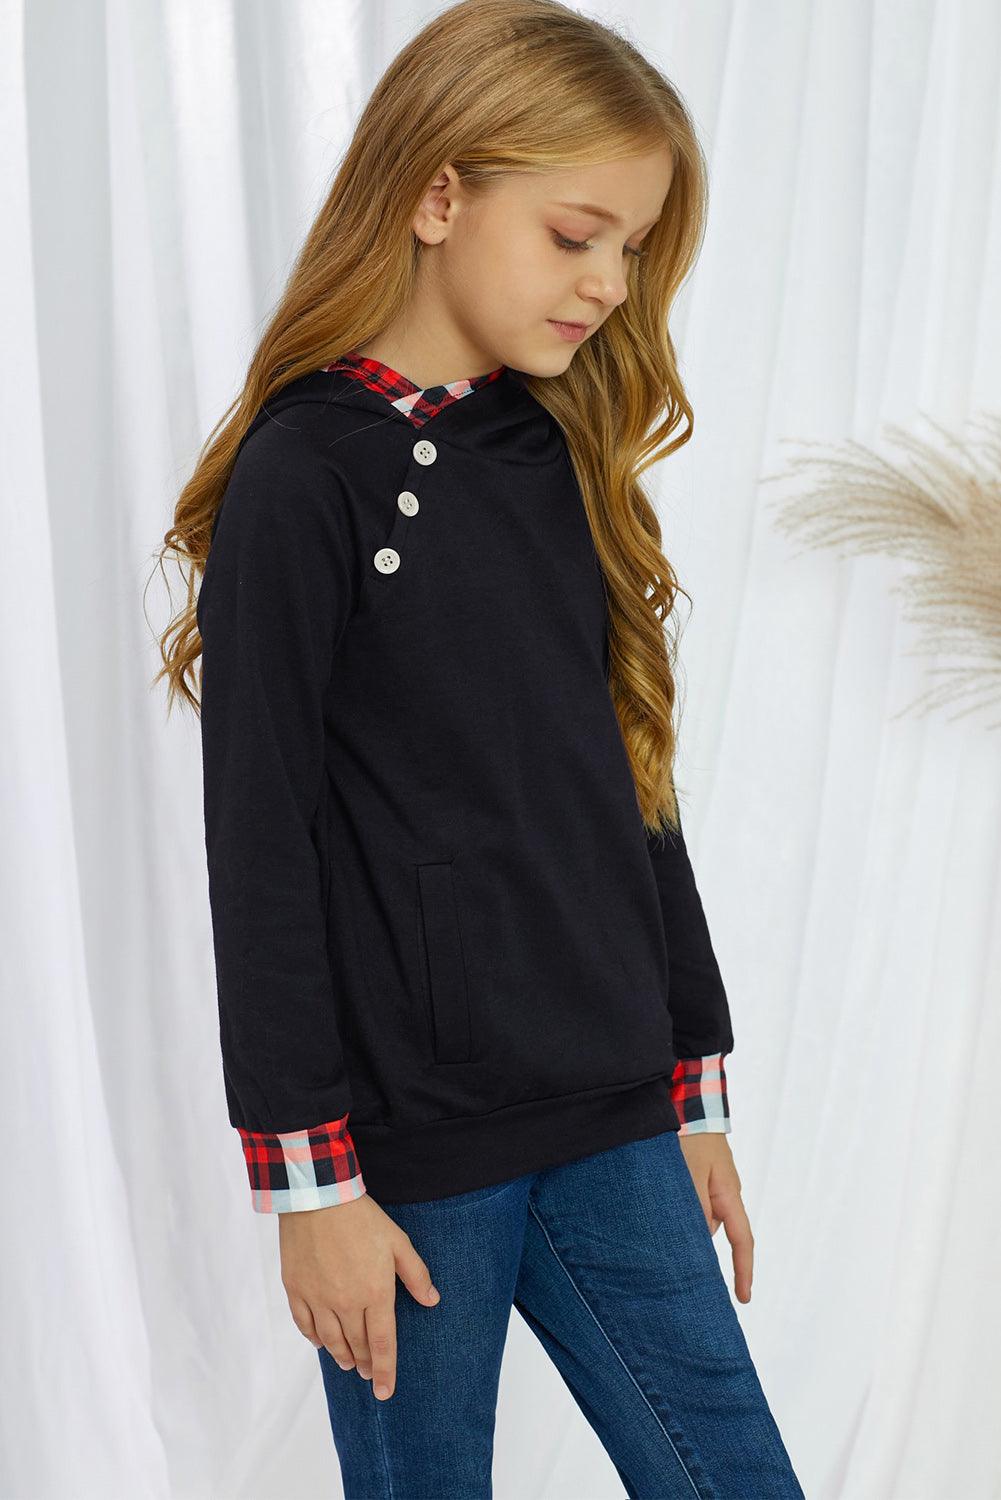 Girls Plaid Decorative Button Hoodie with Pockets - Flyclothing LLC